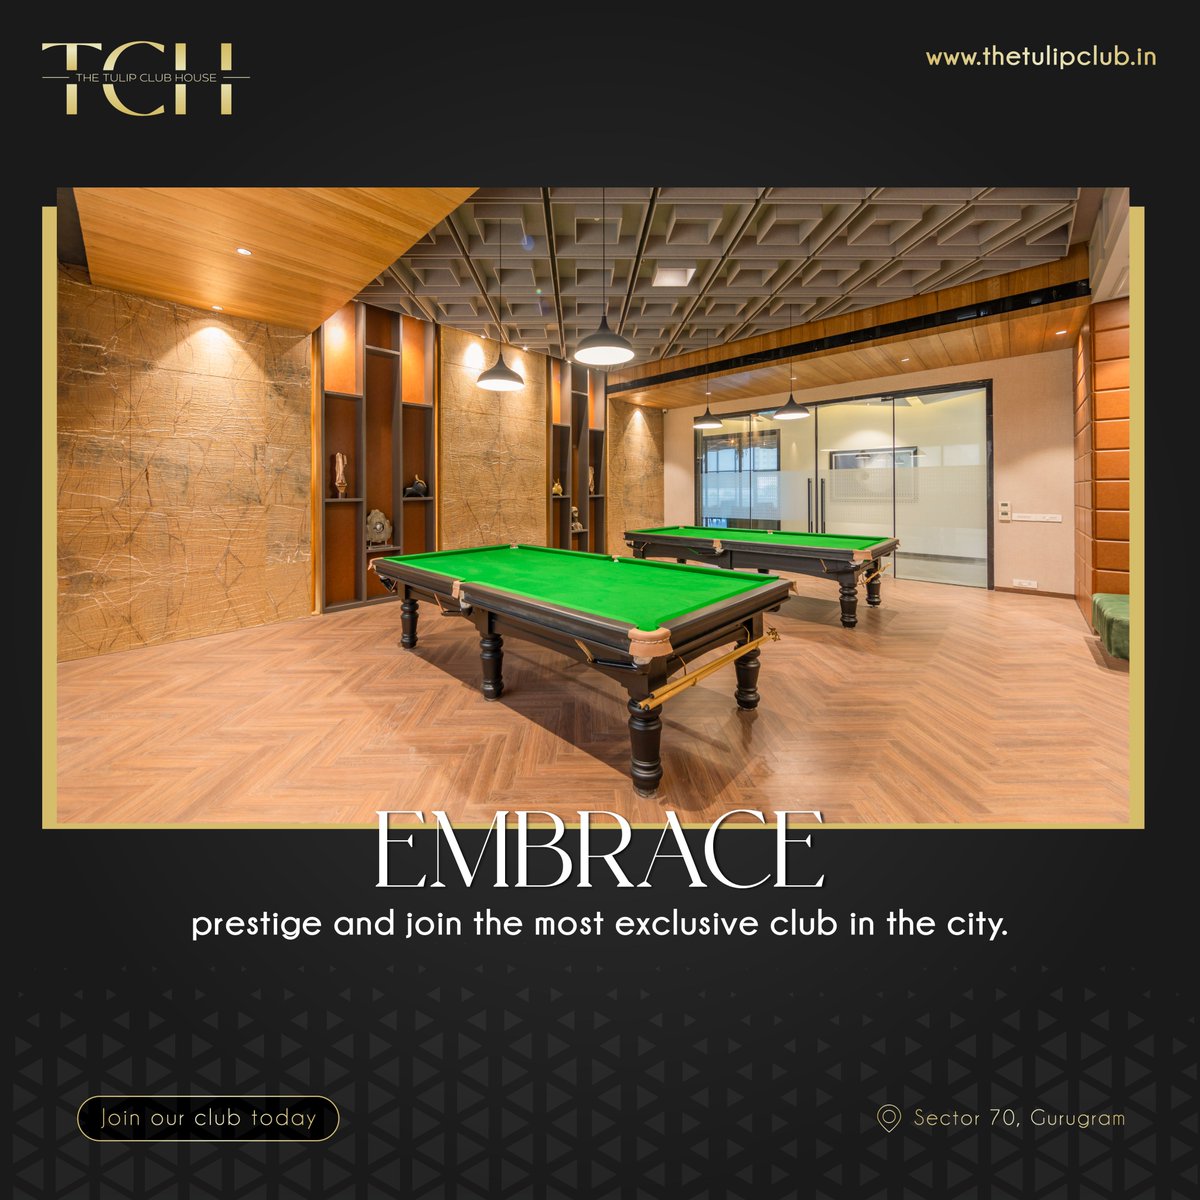 Discover the ultimate in exclusivity and sophistication at TCH Gurugram - the premier private members club in the city. 
.
.
For more info:- thetulipclub.in
.
.
.
#TCHGurugram #PrivateMembersClub #ExclusiveLifestyle #SophisticatedLiving #LuxuryLiving #EliteClub #Prestige